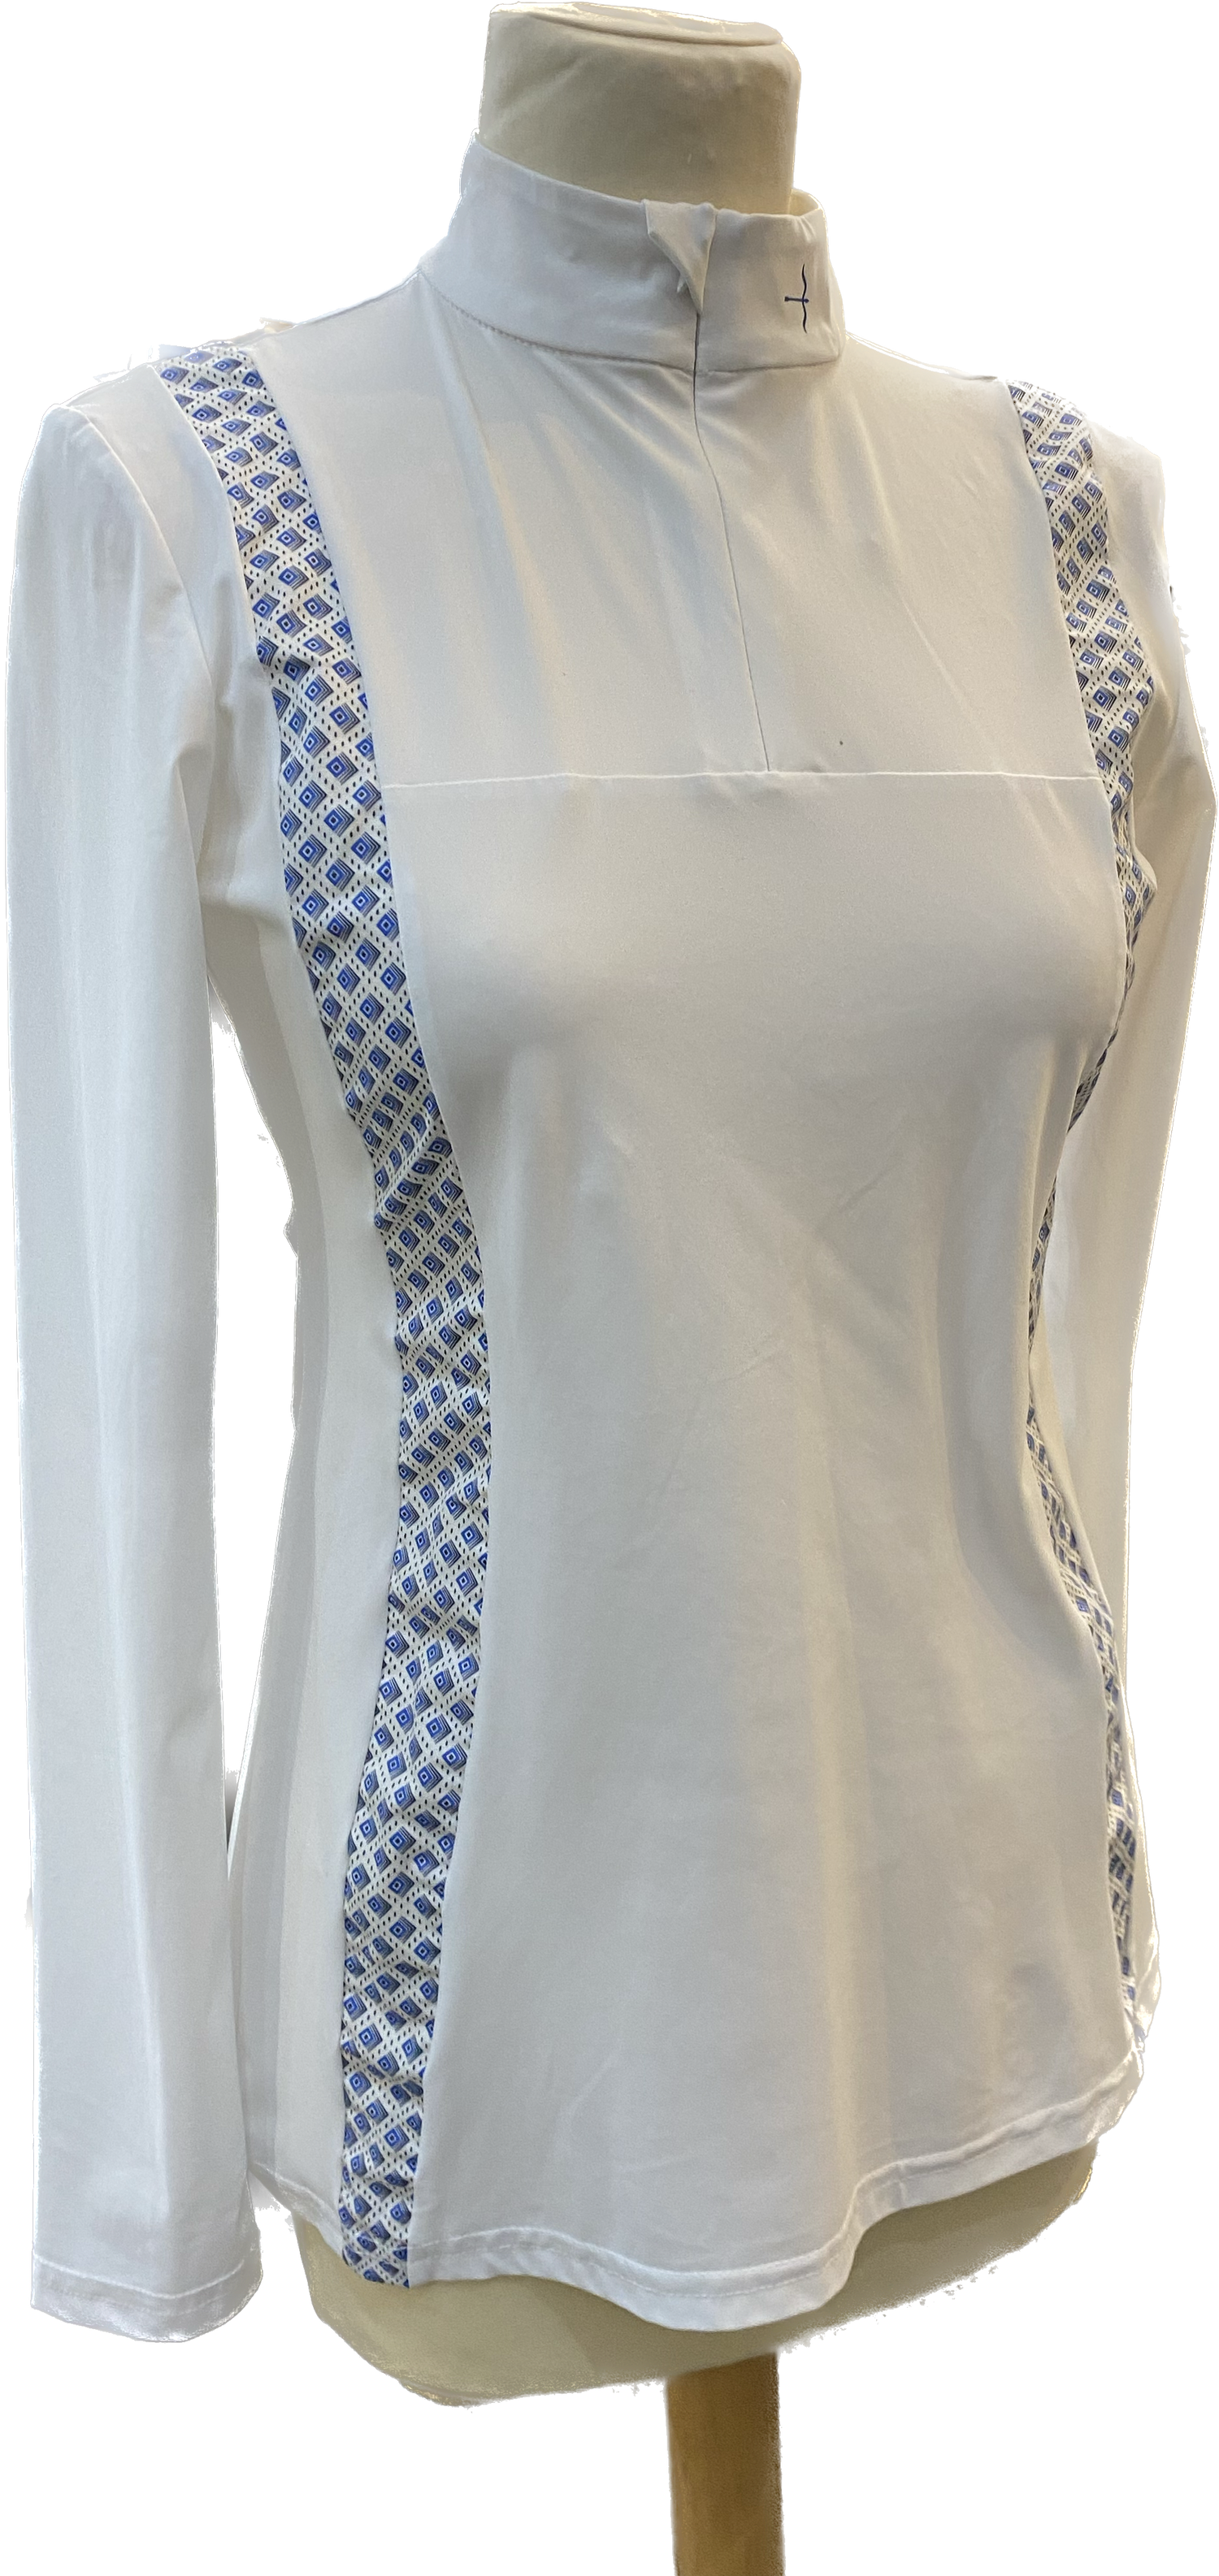 Reduced ! Laguso Jacky Little Square Show Shirt